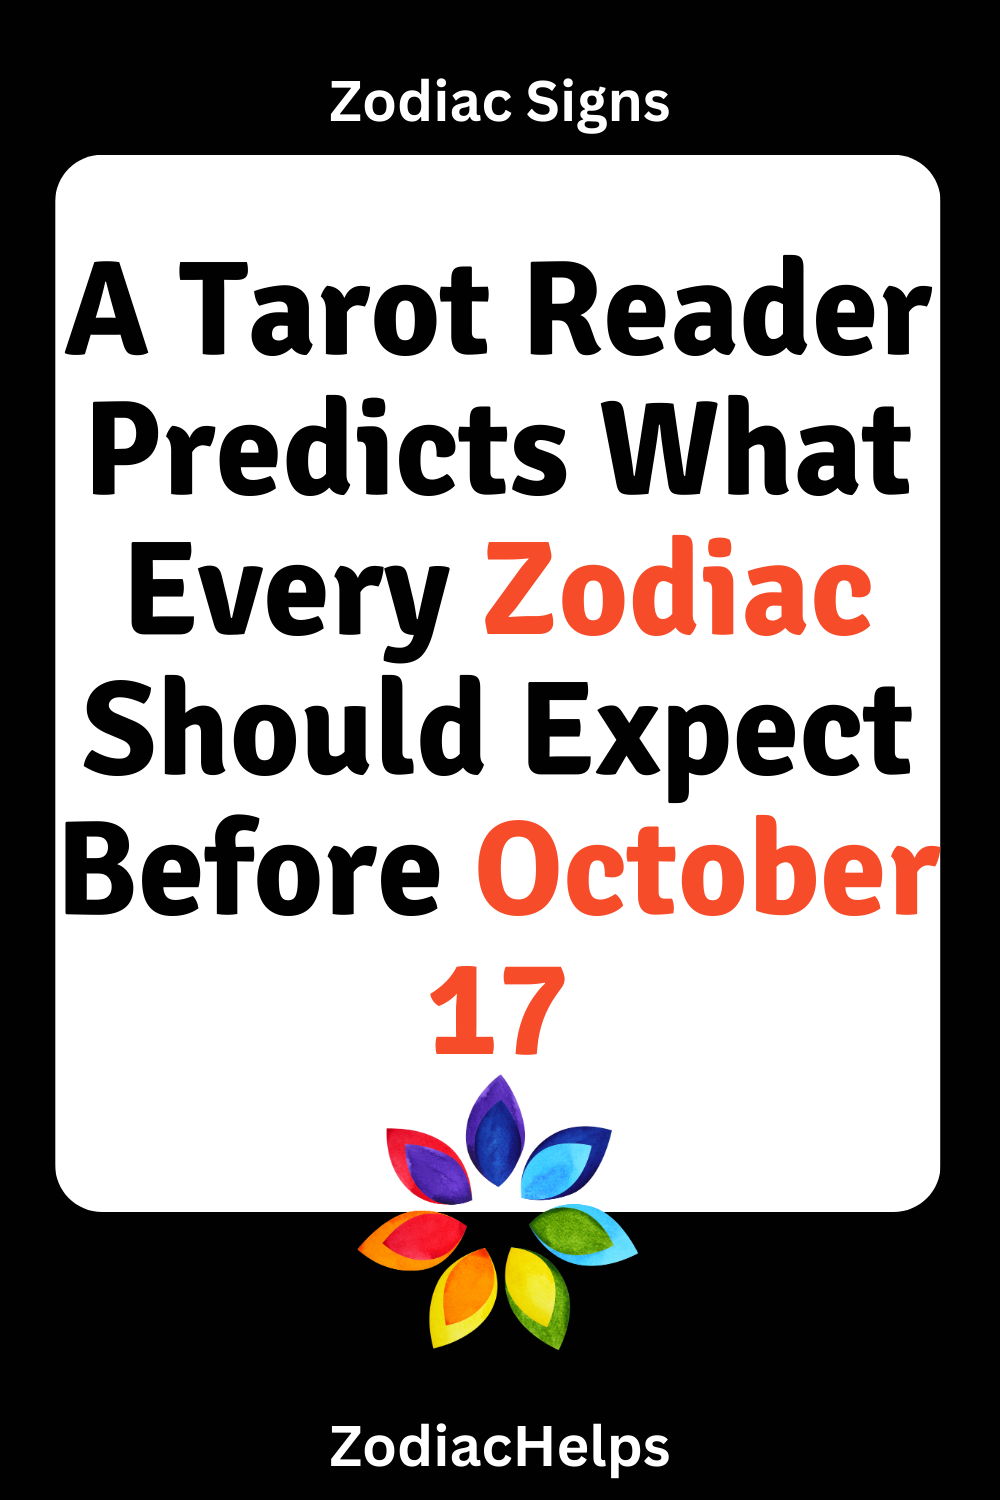 A Tarot Reader Predicts What Every Zodiac Should Expect Before October 17